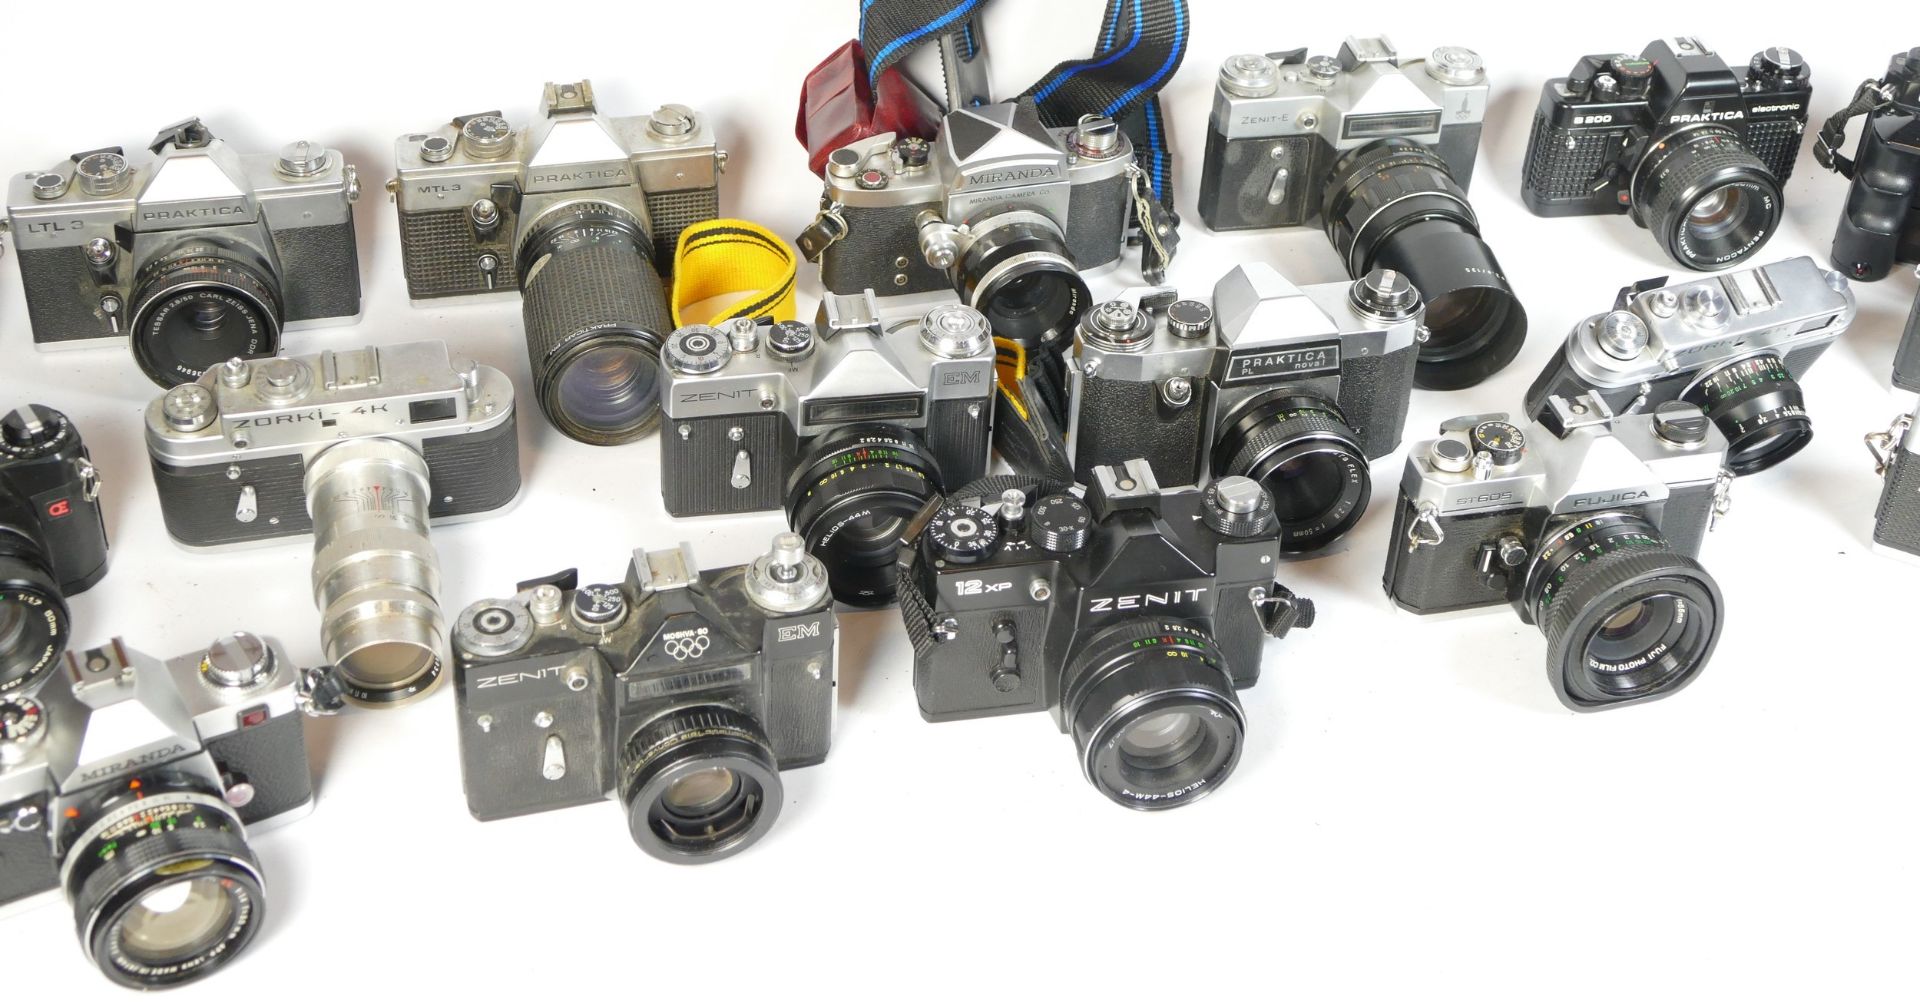 Nineteen SLR vintage film cameras to include a Zenit 12xp, a Chinon CE-5, a Praktica Nova II and a - Image 2 of 2